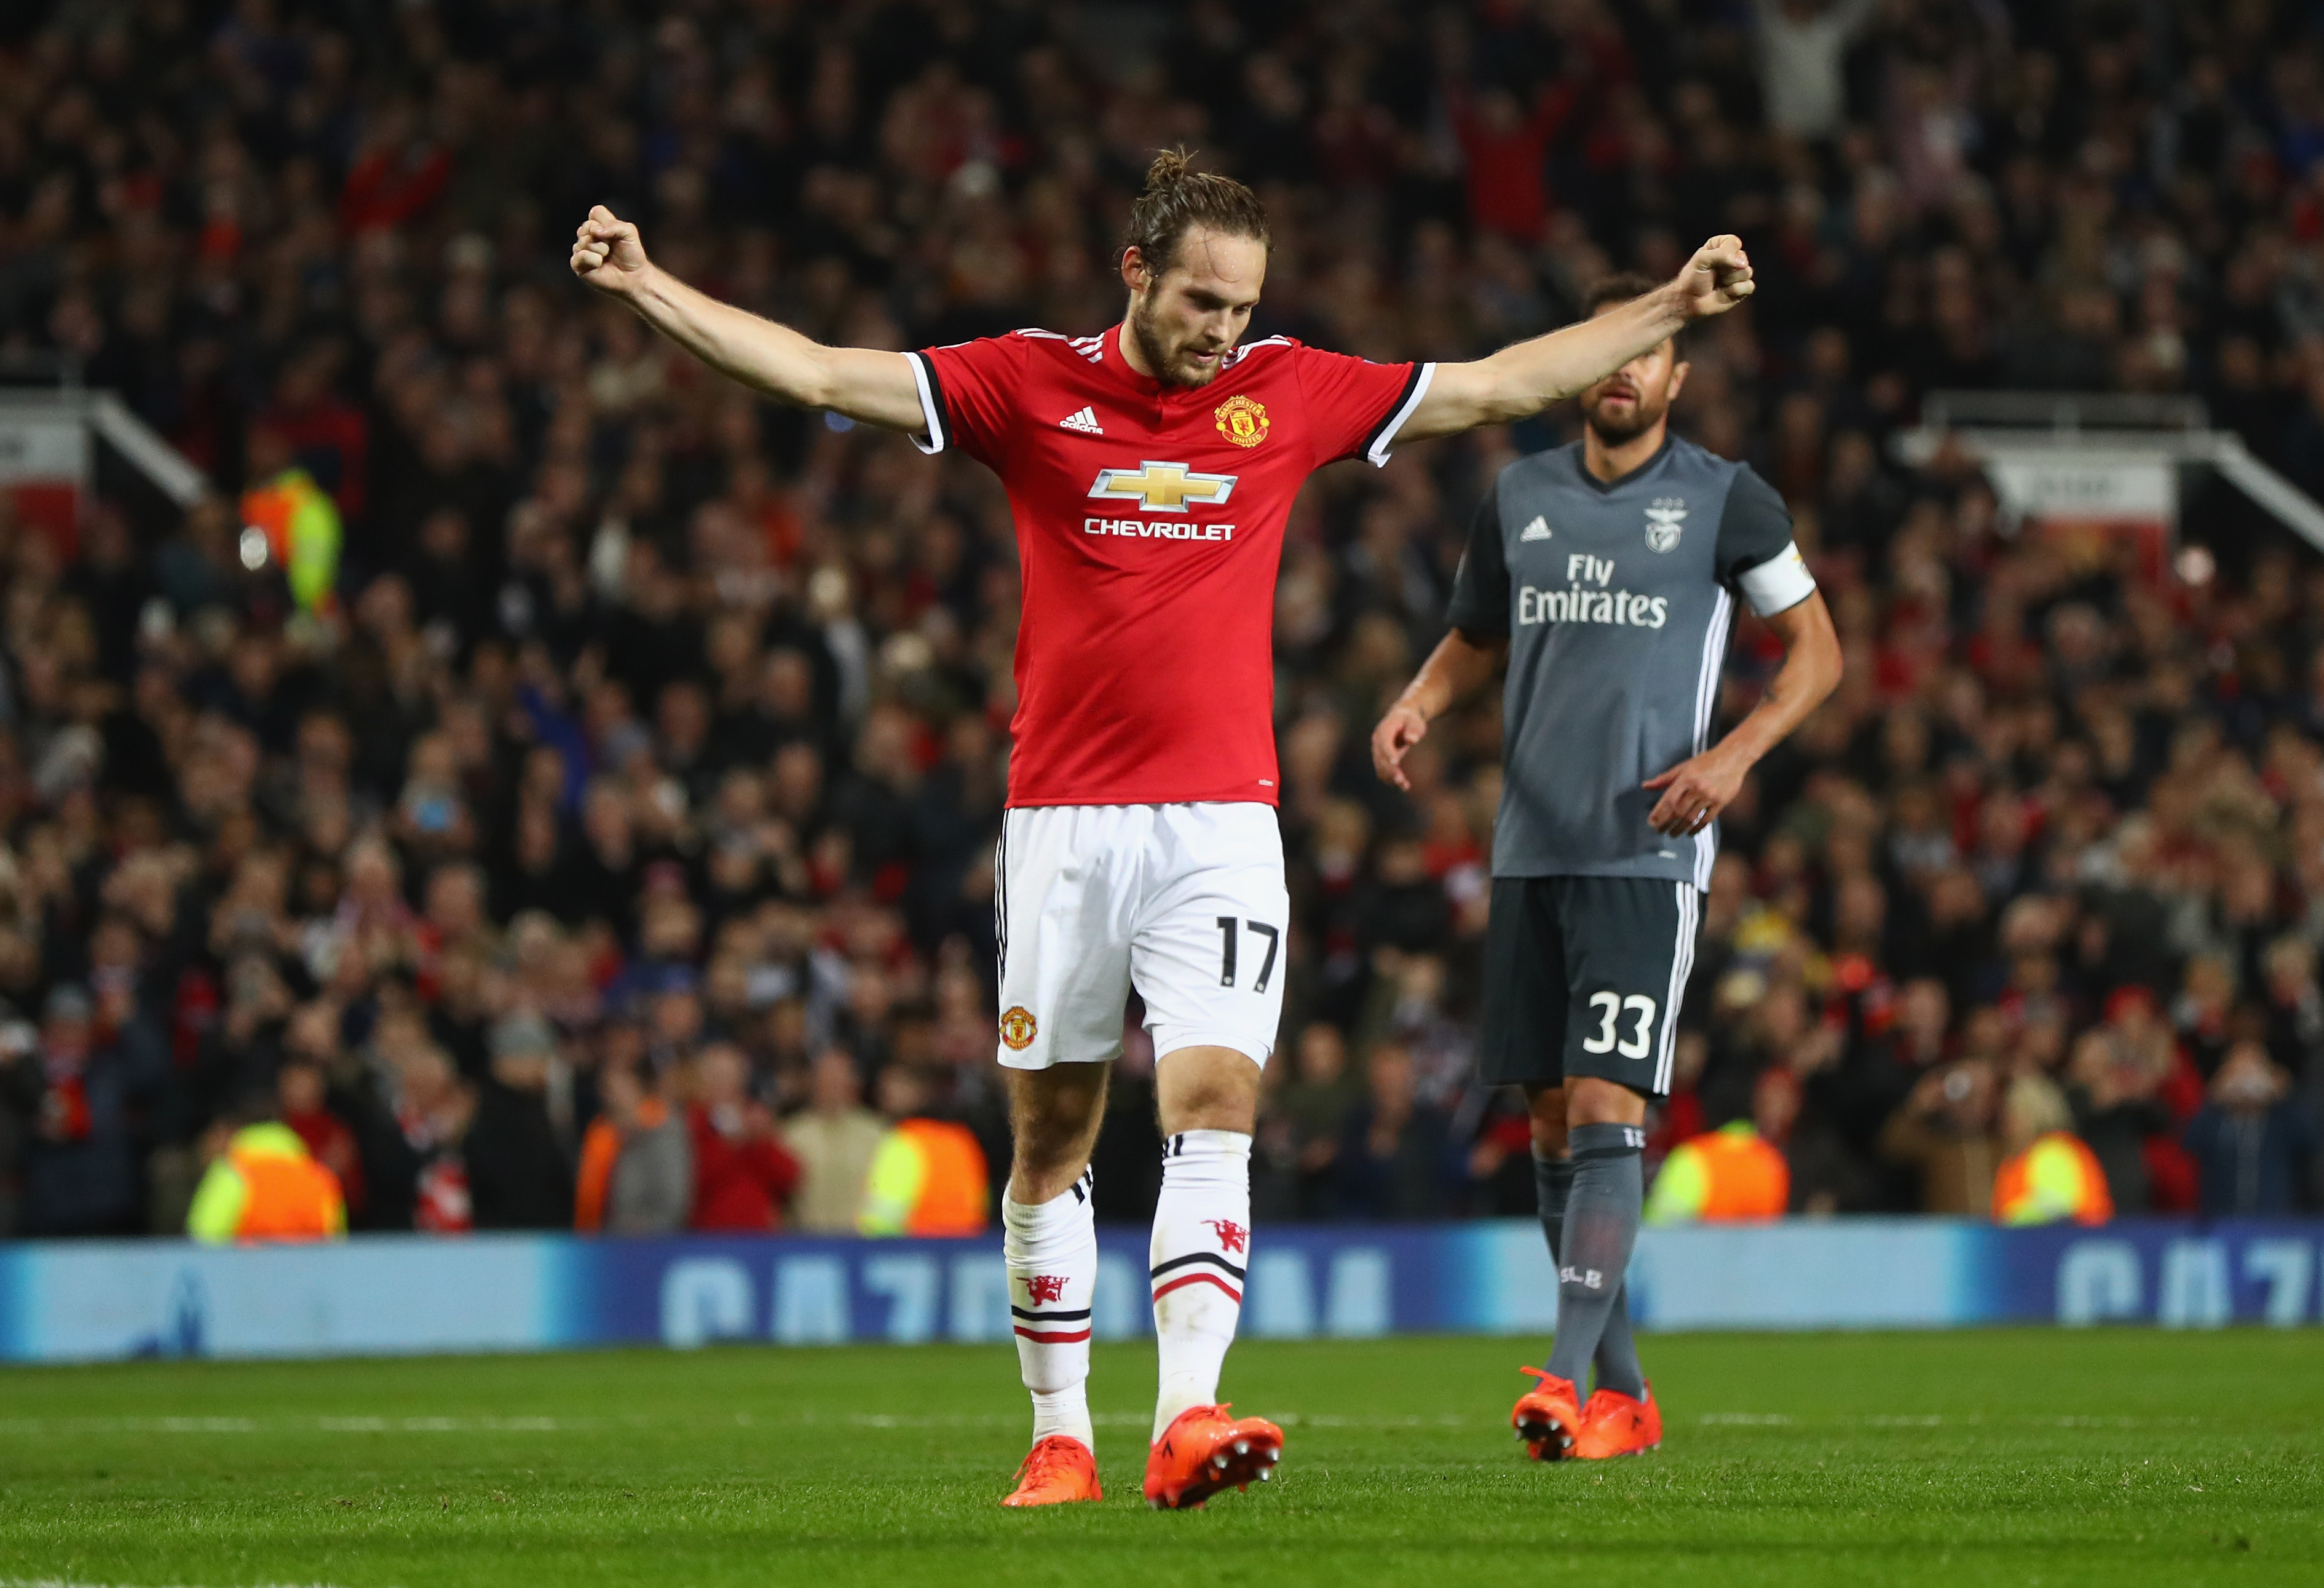 MANCHESTER, ENGLAND - OCTOBER 31: Daley Blind of Manchester United celebrates scoring a penalty, his side's second goal during the UEFA Champions League group A match between Manchester United and SL Benfica at Old Trafford on October 31, 2017 in Manchester, United Kingdom.  (Photo by Michael Steele/Getty Images)